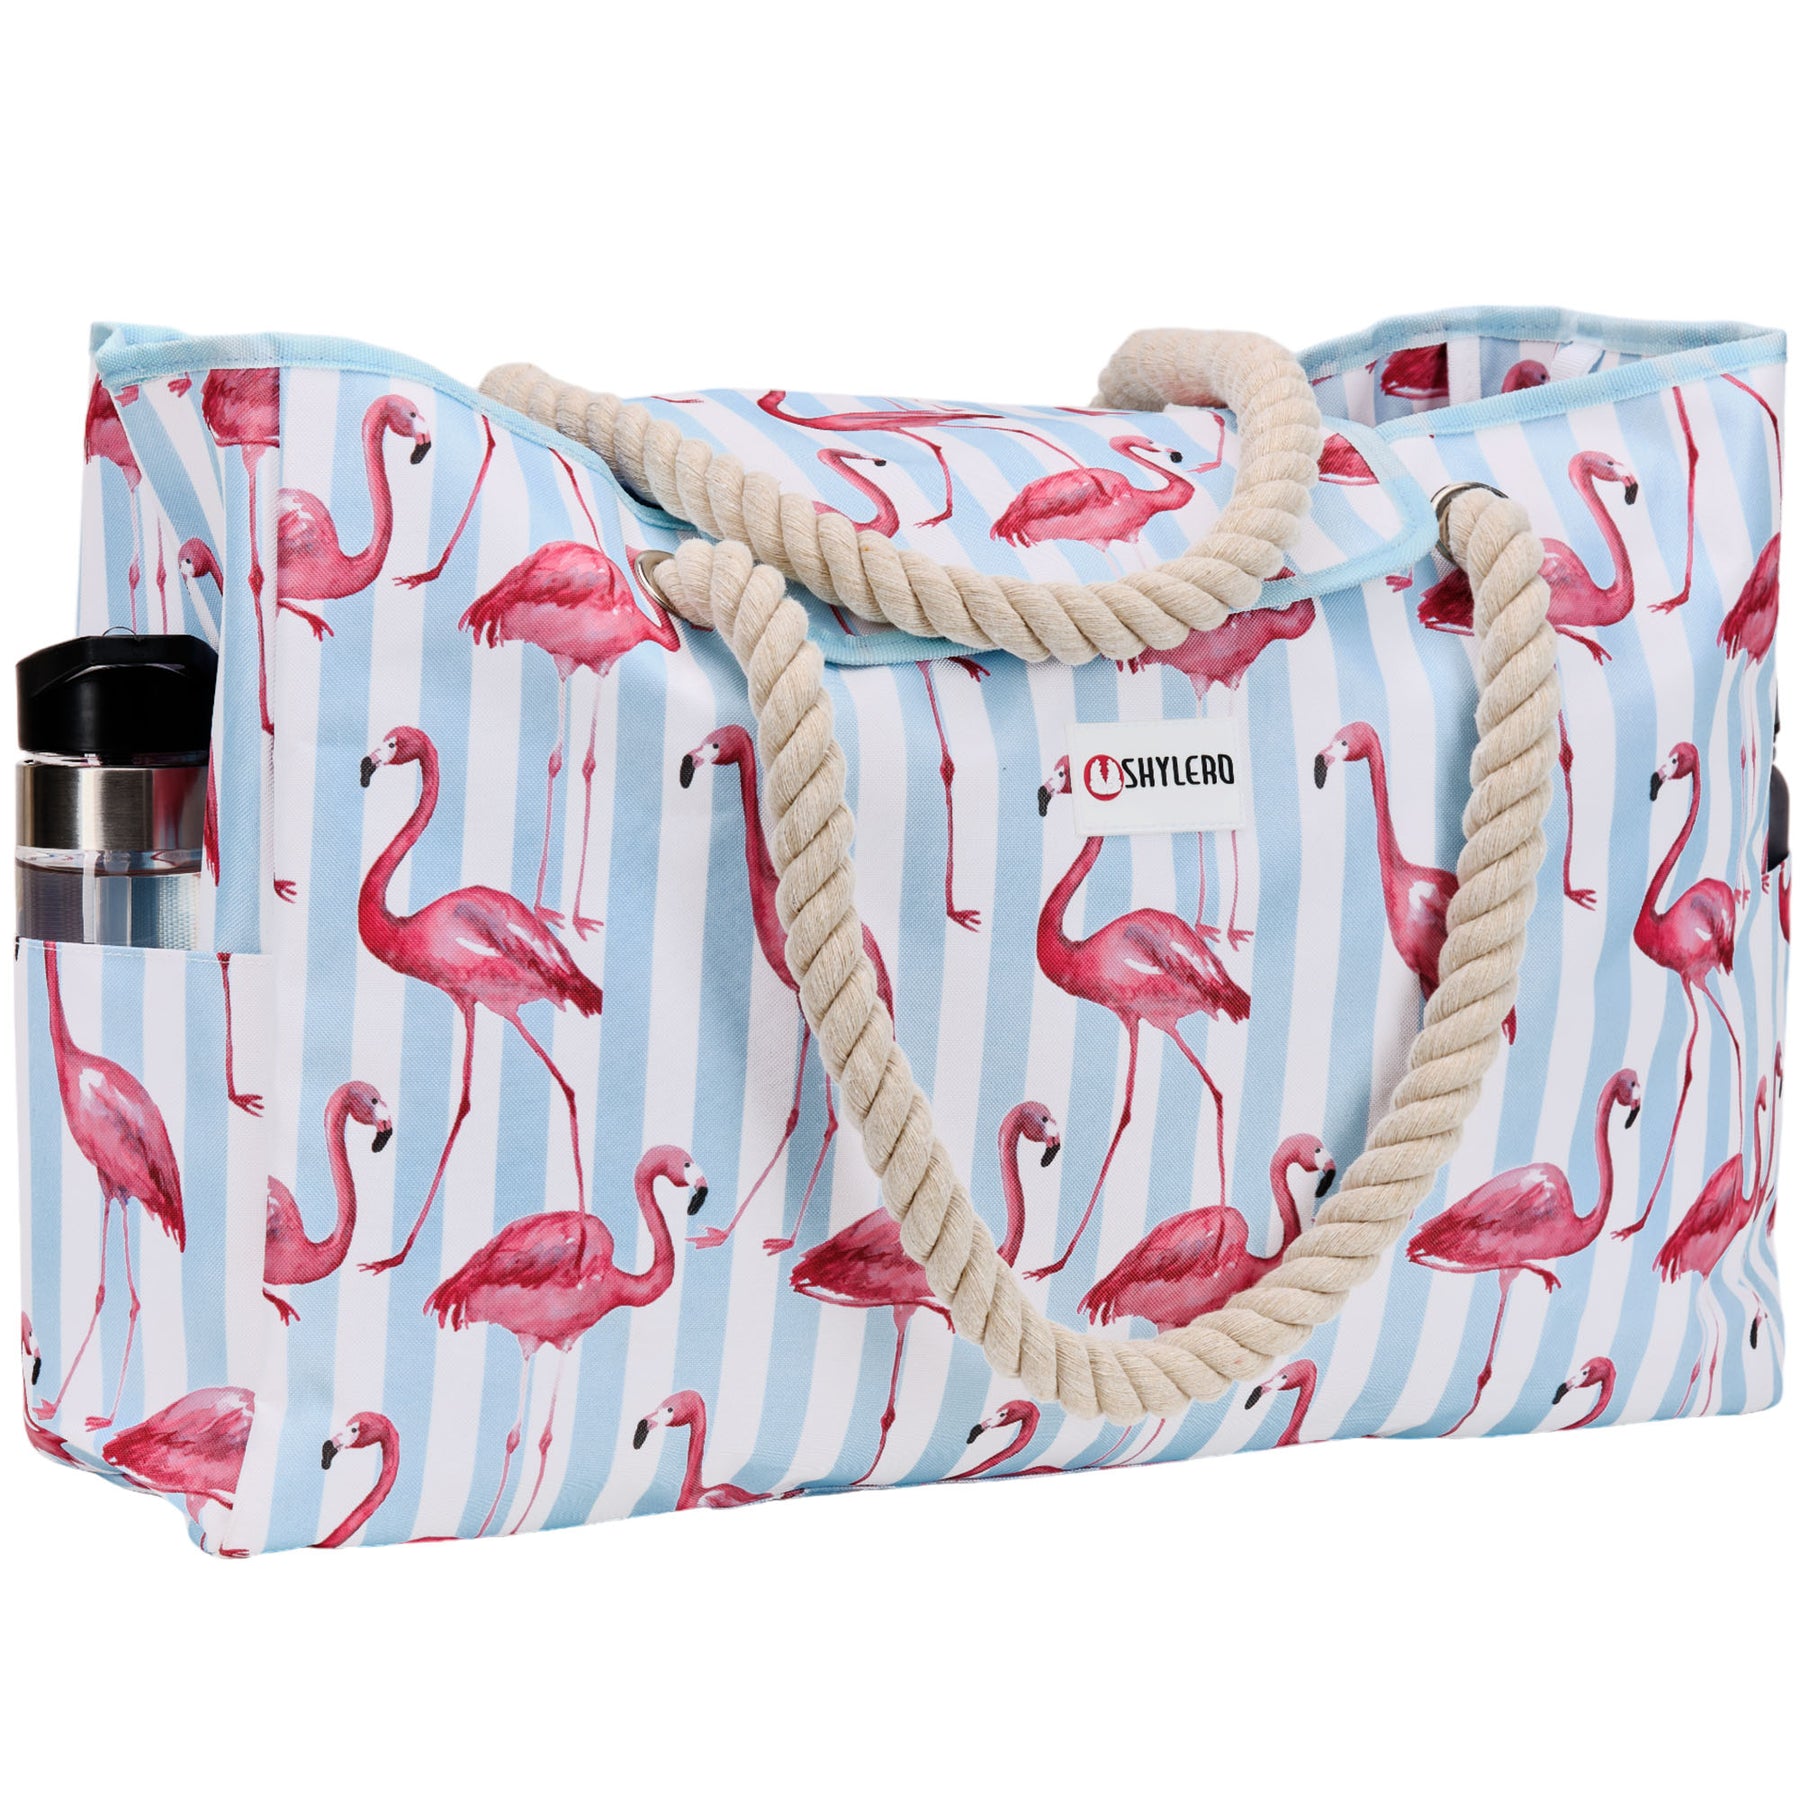 Beach Bag and Pool Bag | Water Repellent | Top Magnet | Family Size XXL | L22" x H15" x W6" | Pink Flamingo